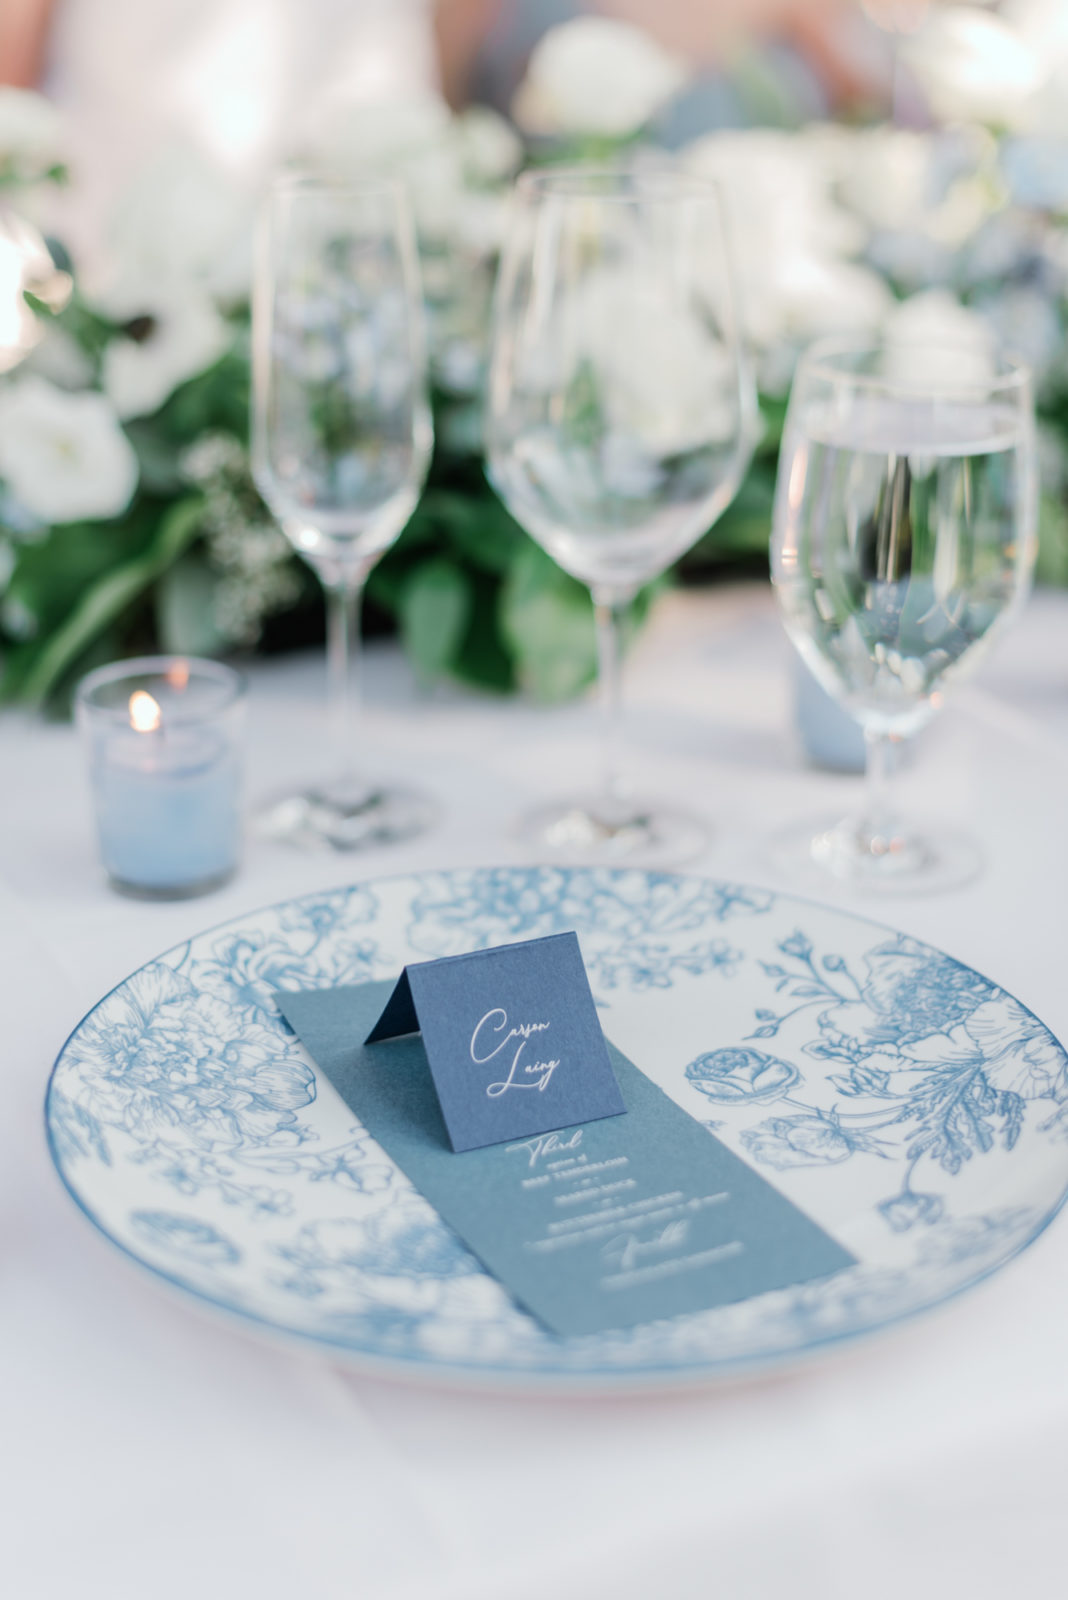 Timeless wedding place cards for an elegant reception